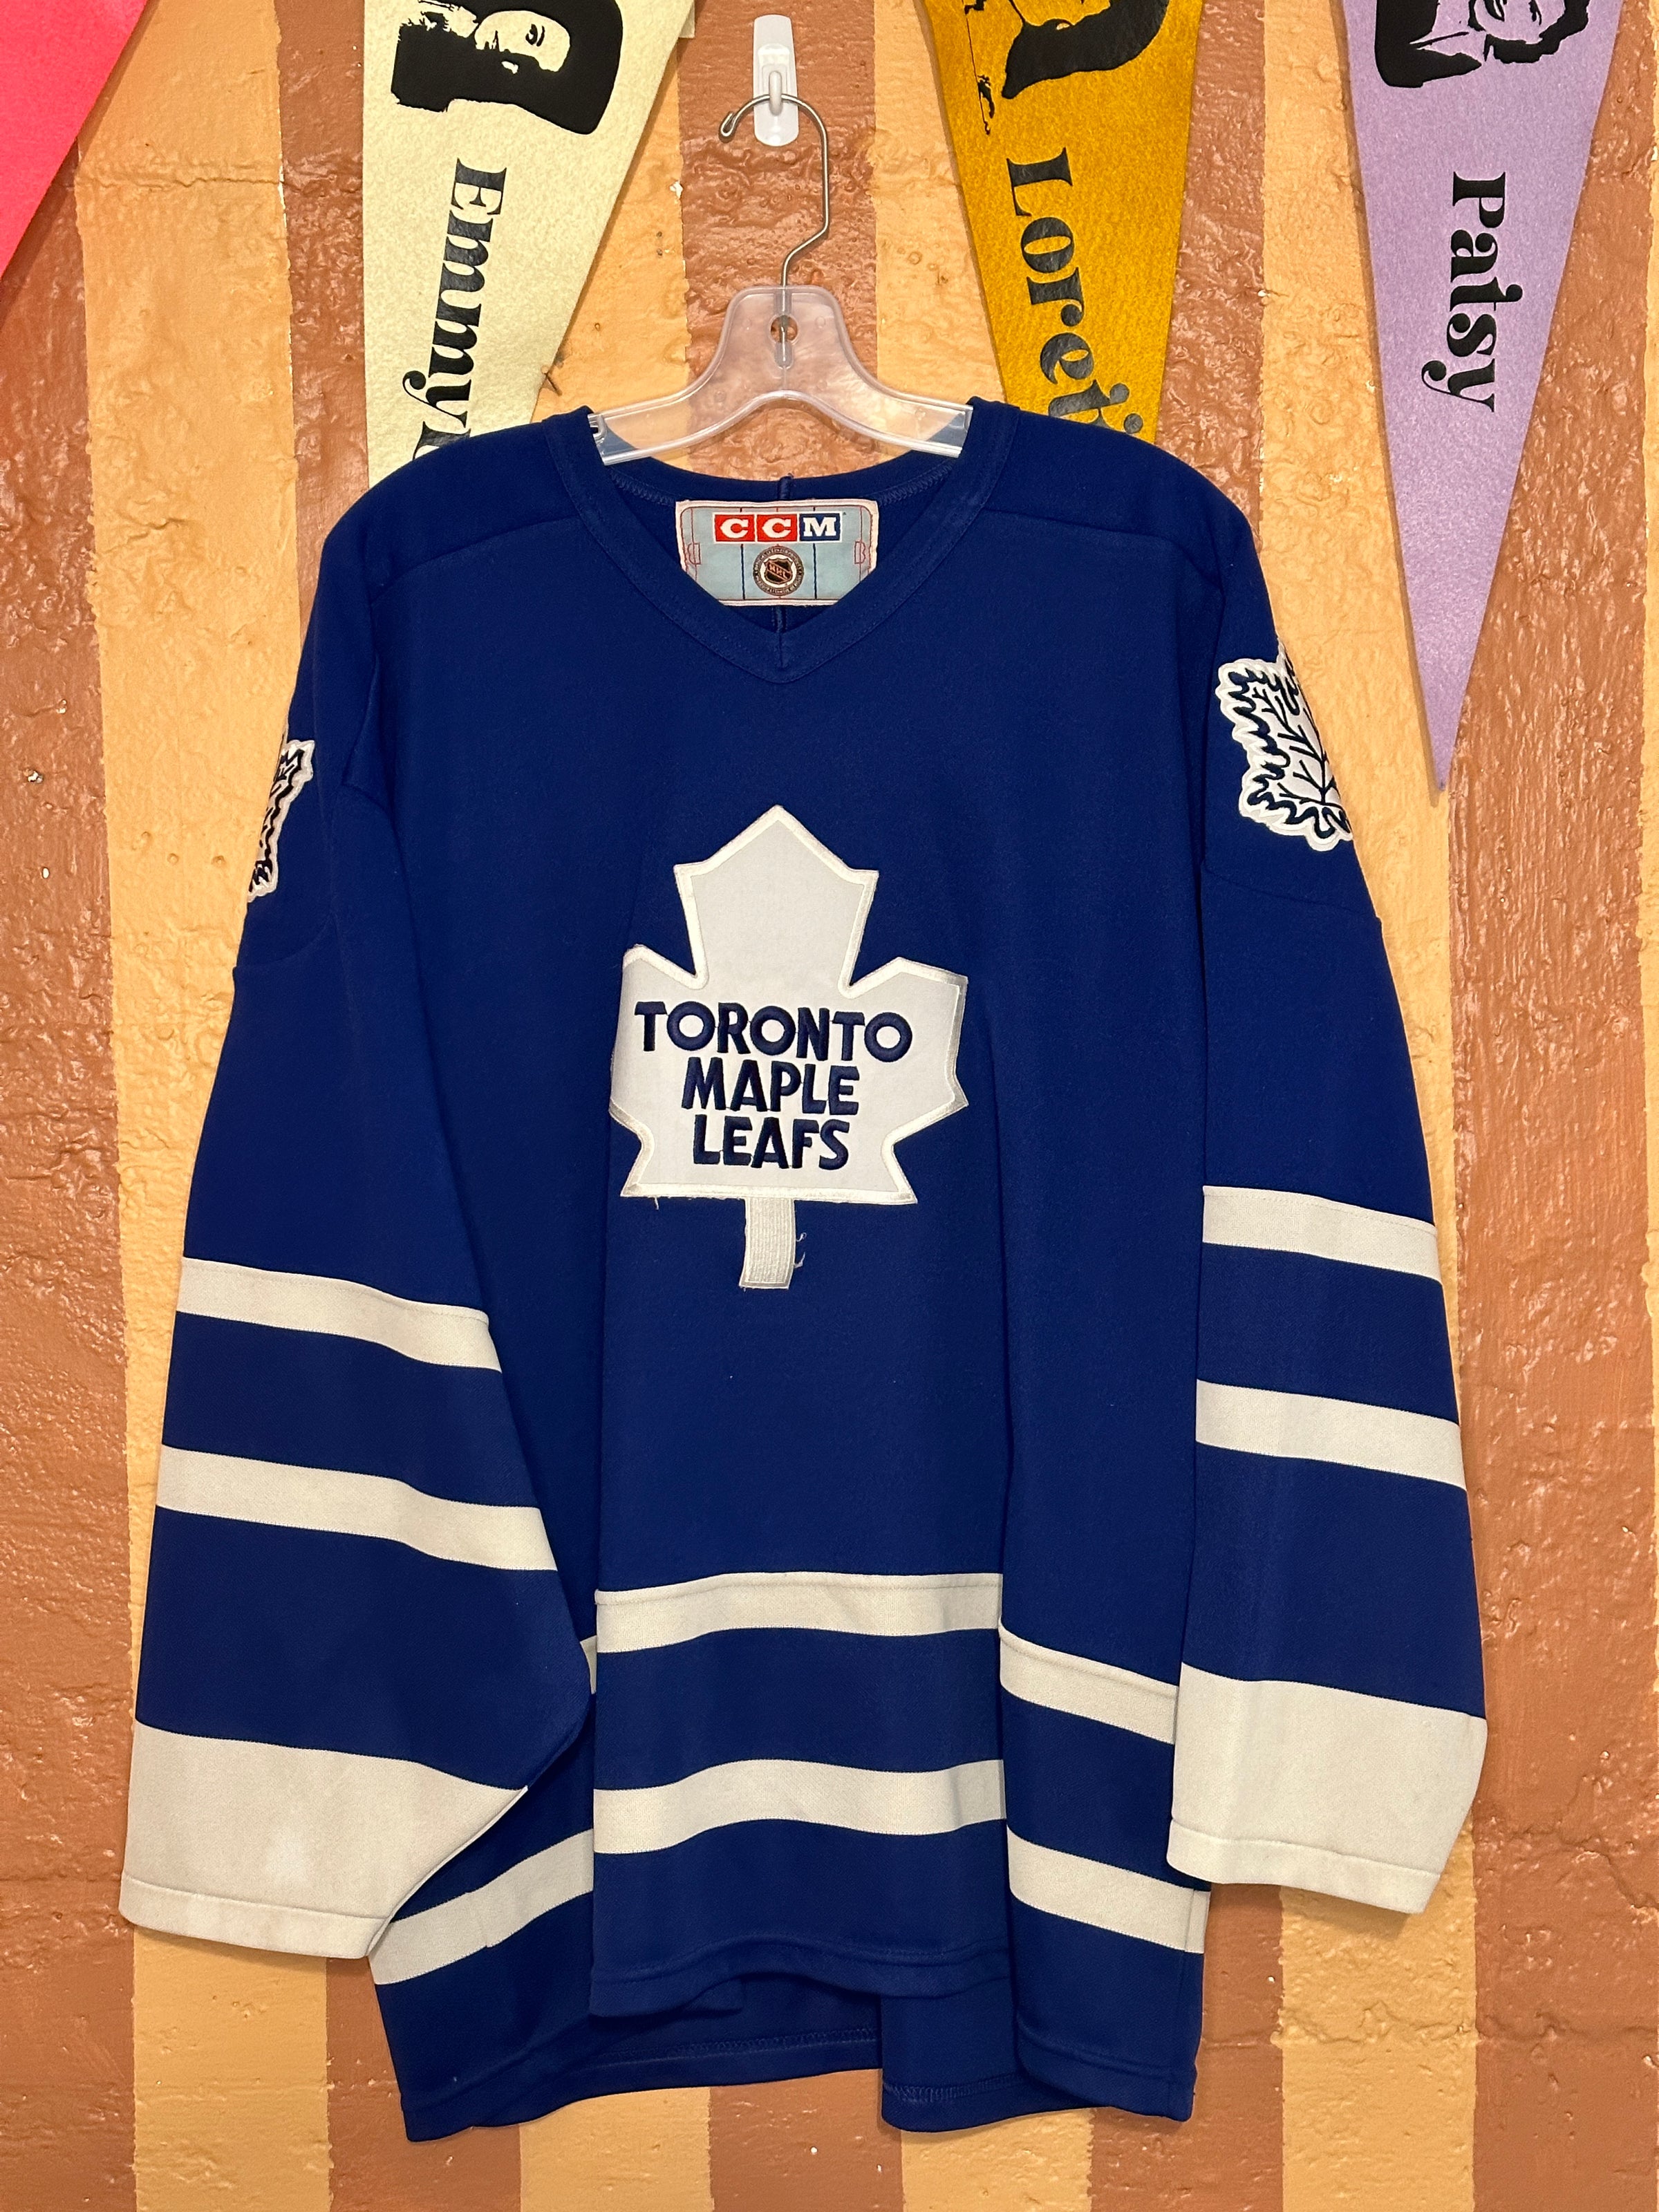 Toronto Maple Leafs 15 Ccm Vintage Jersey Size Small White -  Israel